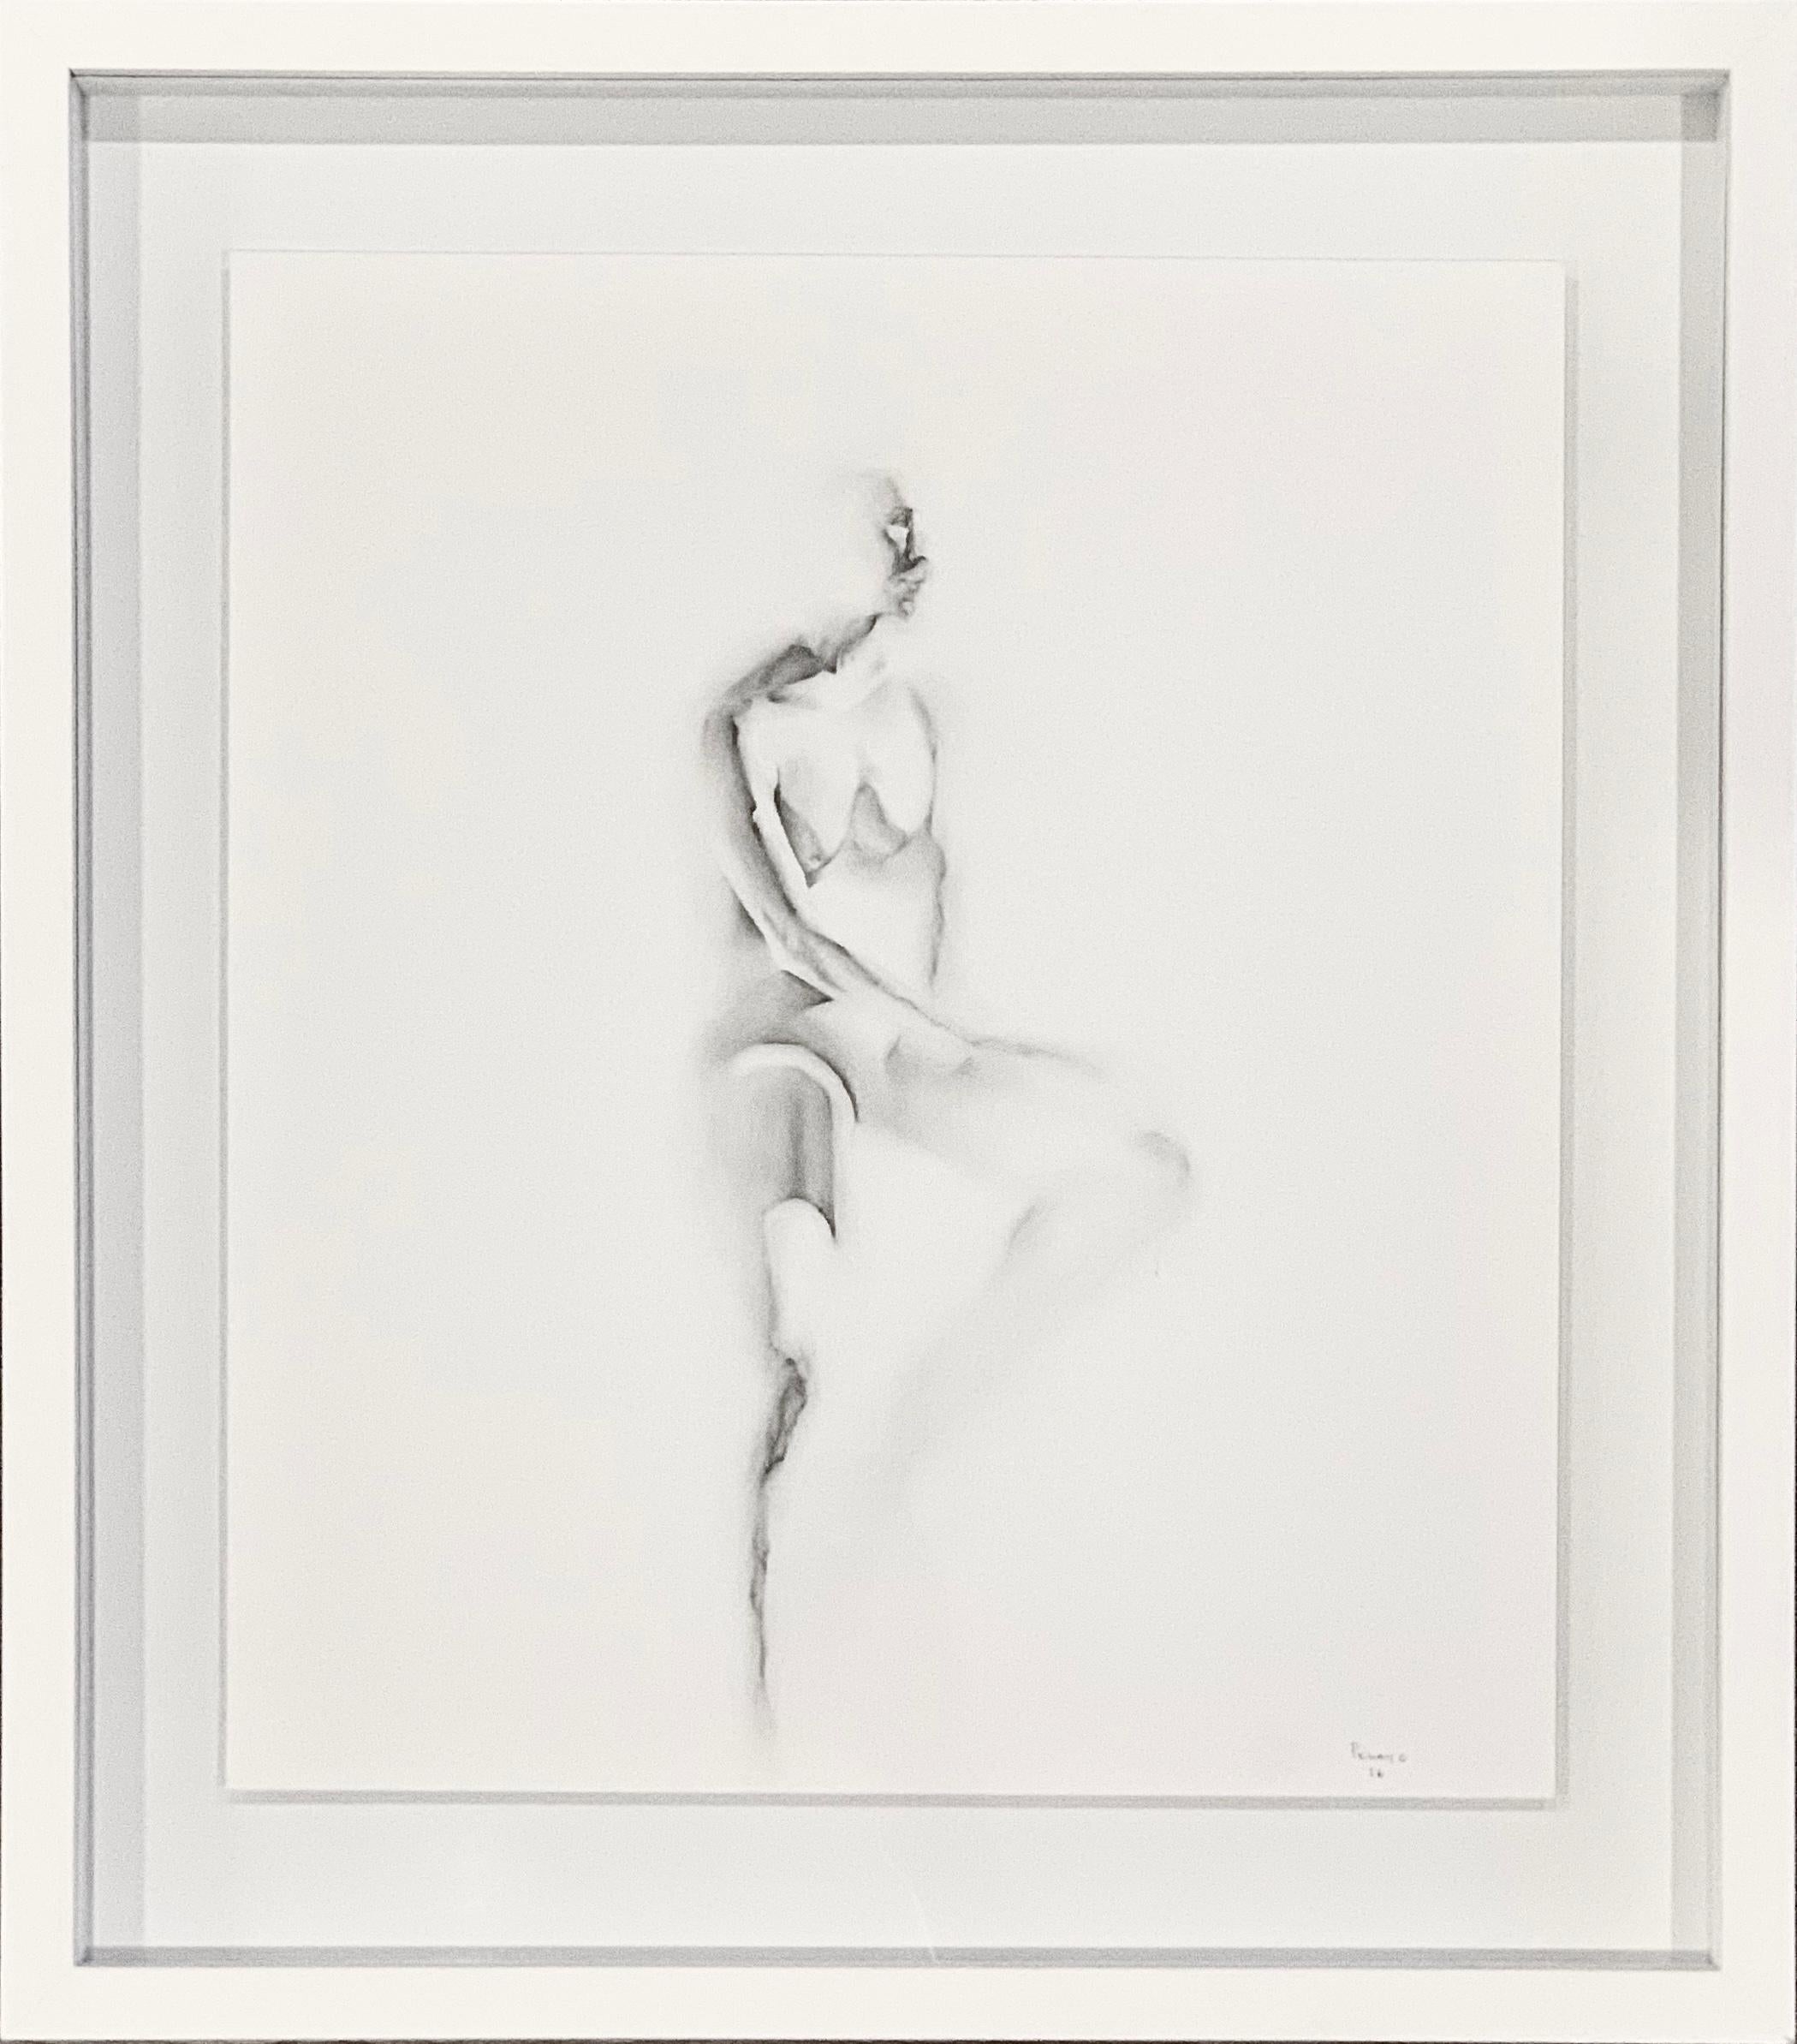 "Untitled 28" (FRAMED) Pencil Drawing 21" x 18" inch by Antonio Pelayo

Size unframed: 15.5" x 13.5 inch 
Medium: Pencil on Paper

Artist Antonio Pelayo, born in Glendale, California, and yet raised for most of his childhood in the Mexican